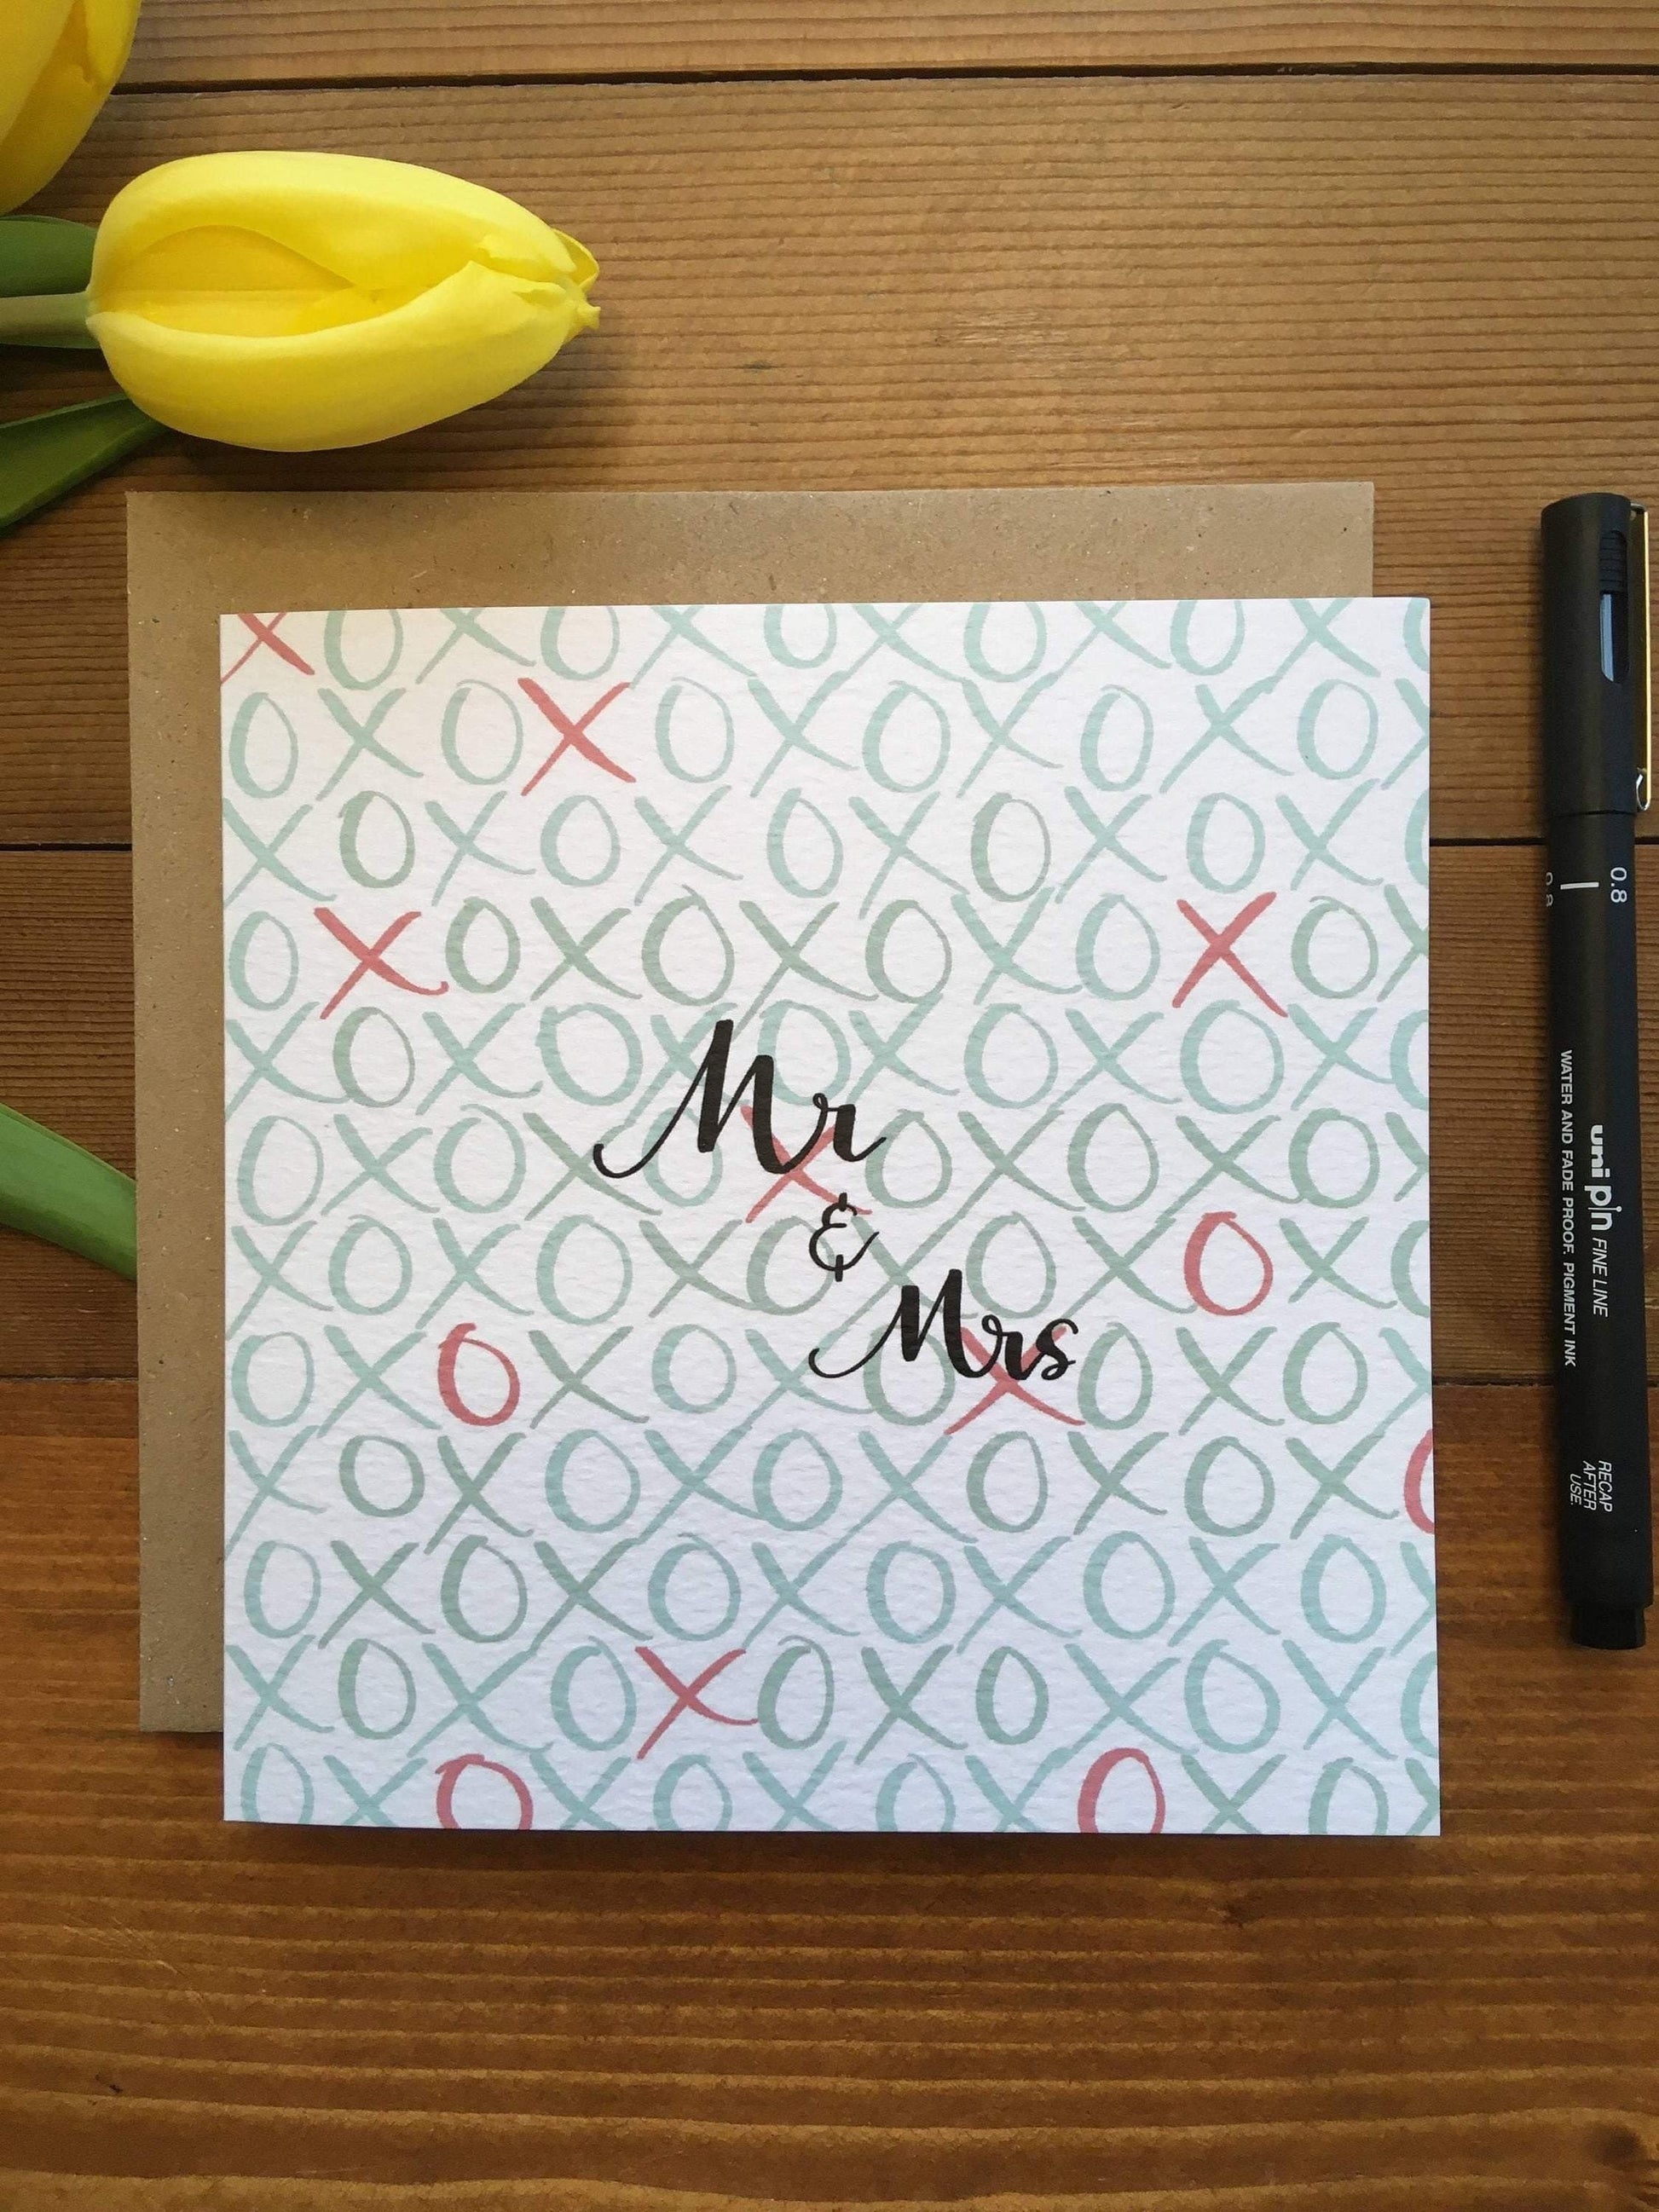 Luxury wedding card for mr & Mrs with pale blue X’s and O’s on the bsckground